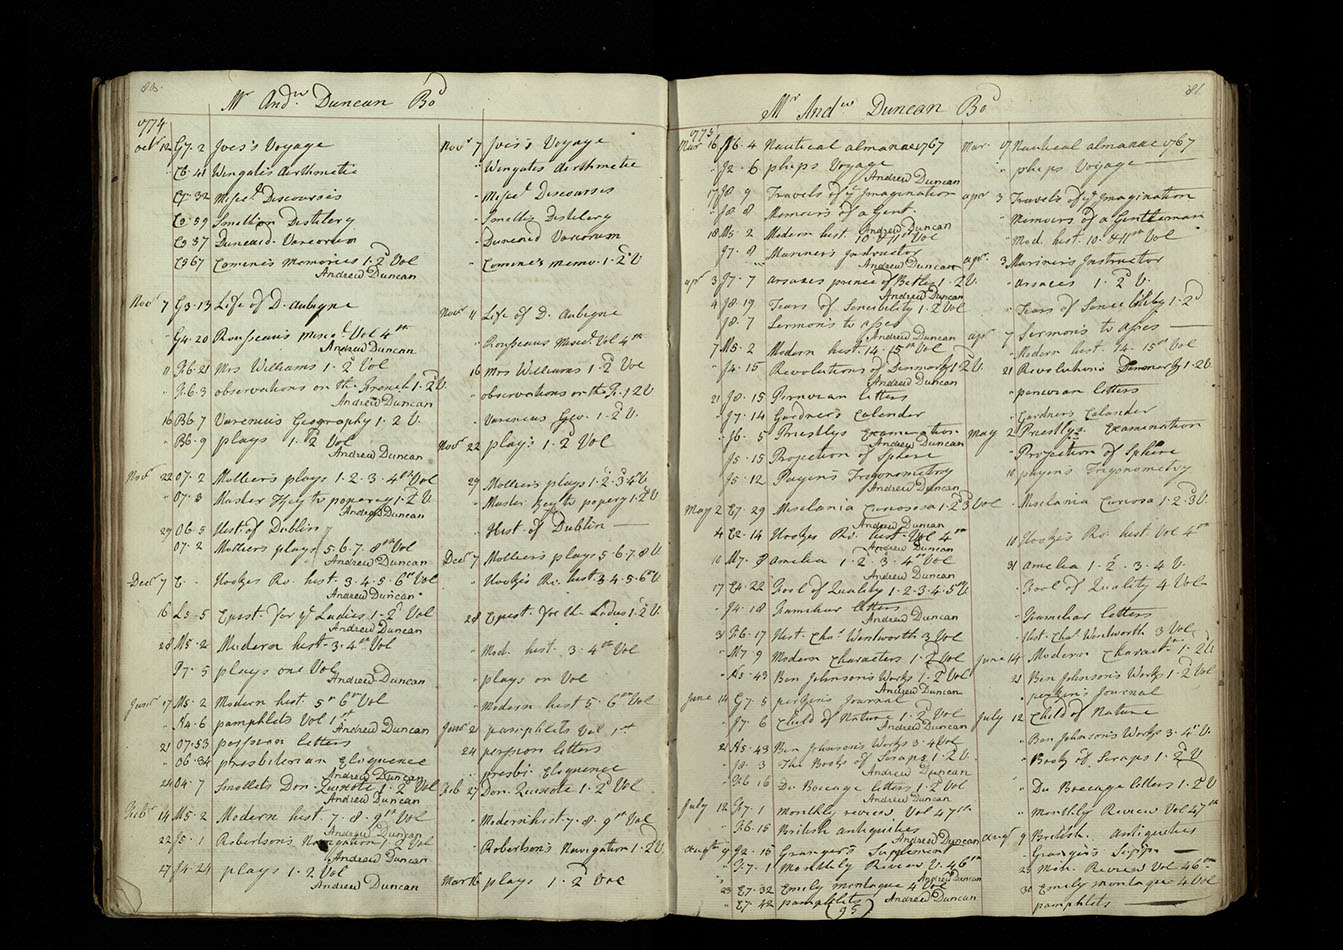 A page from the receipt book showing the books borrowed in 1774 and 1775 by Andrew Duncan, an arts student in the United College.  The books he took out comprise a diverse mixture of mathematical works, travel writing, novels, drama, histories and periodicals.  UYLY207/2, pp. 80-81.